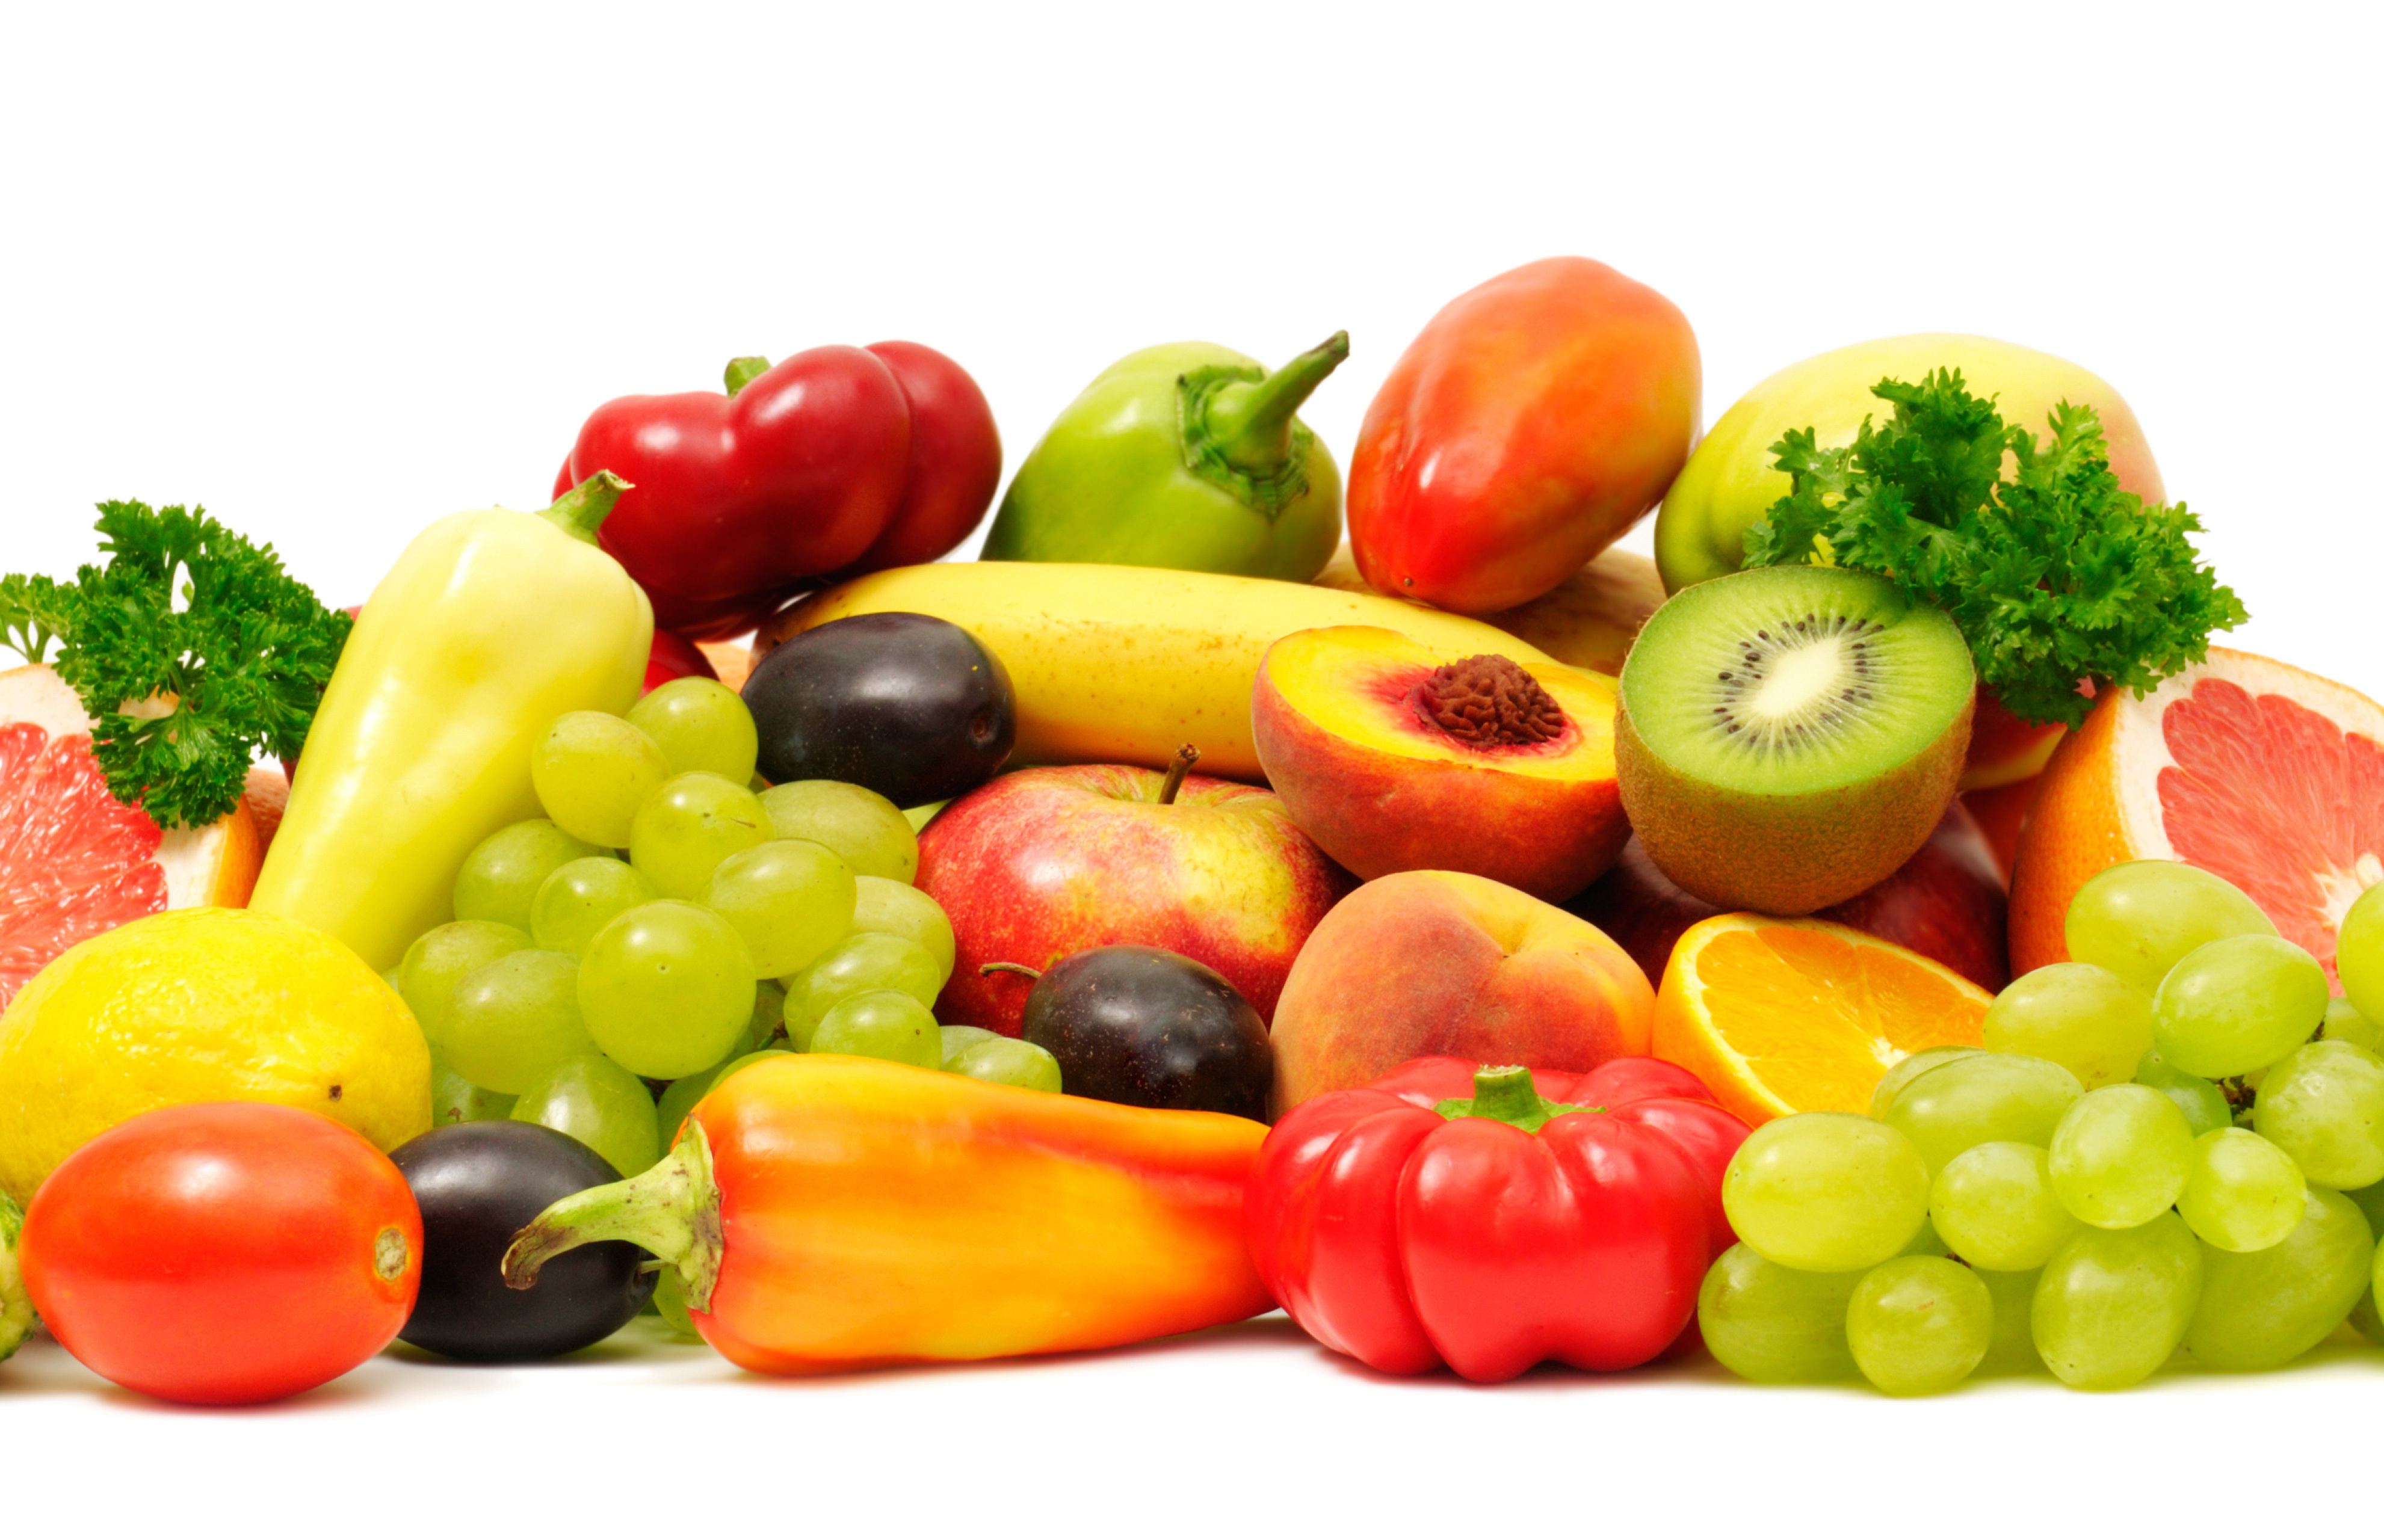 Assorted Fruits and Vegetables